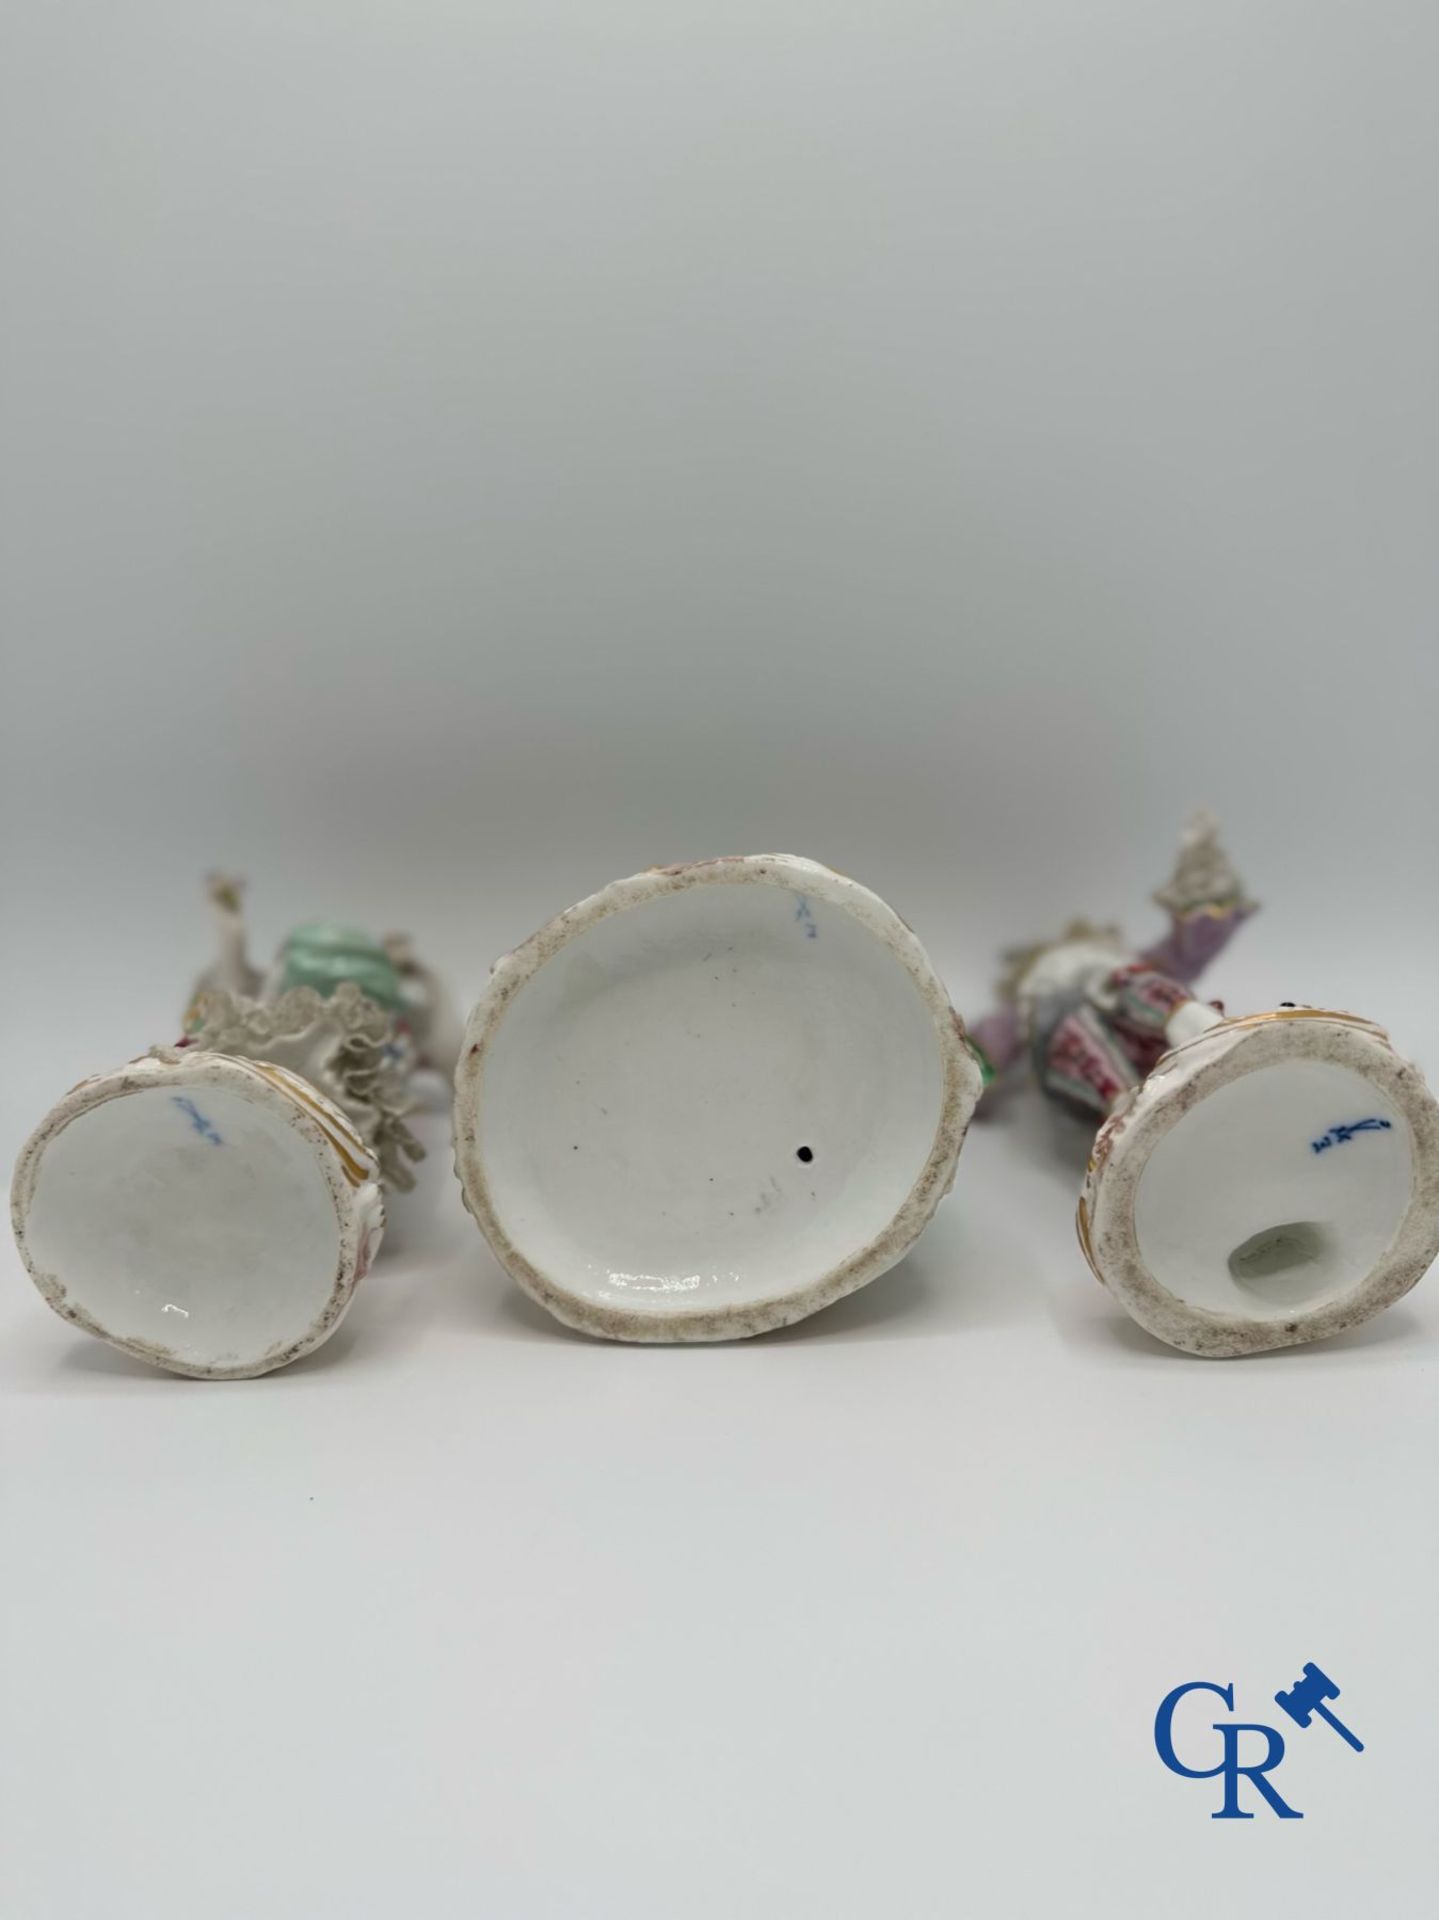 Porcelain: 3 groups of multicoloured decorated porcelain in the style of Meissen. 19th century. - Image 12 of 12